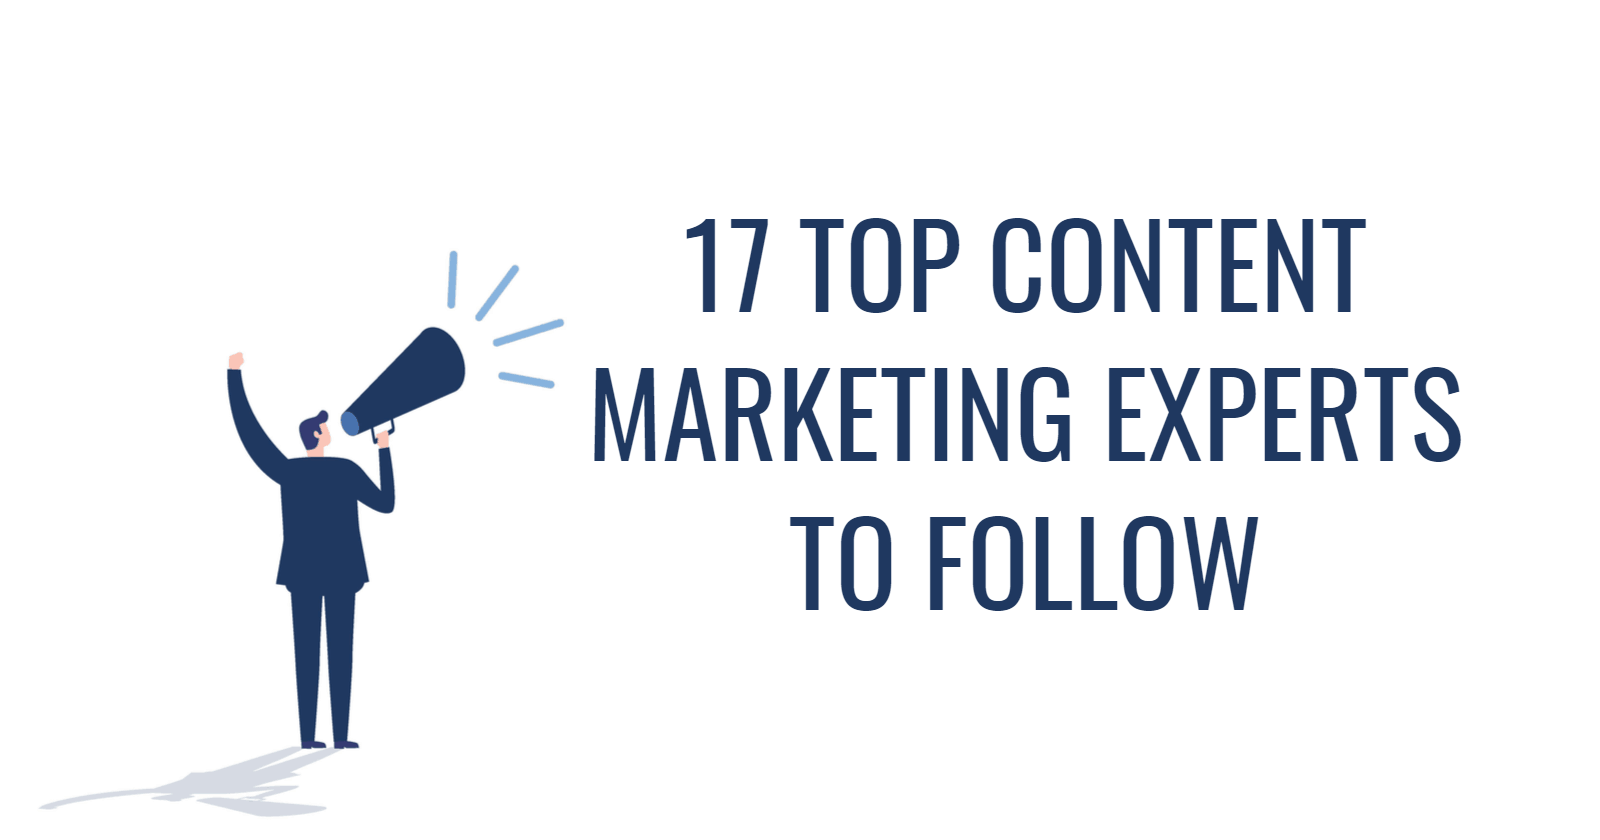 17 Top Content Marketing Experts to Follow